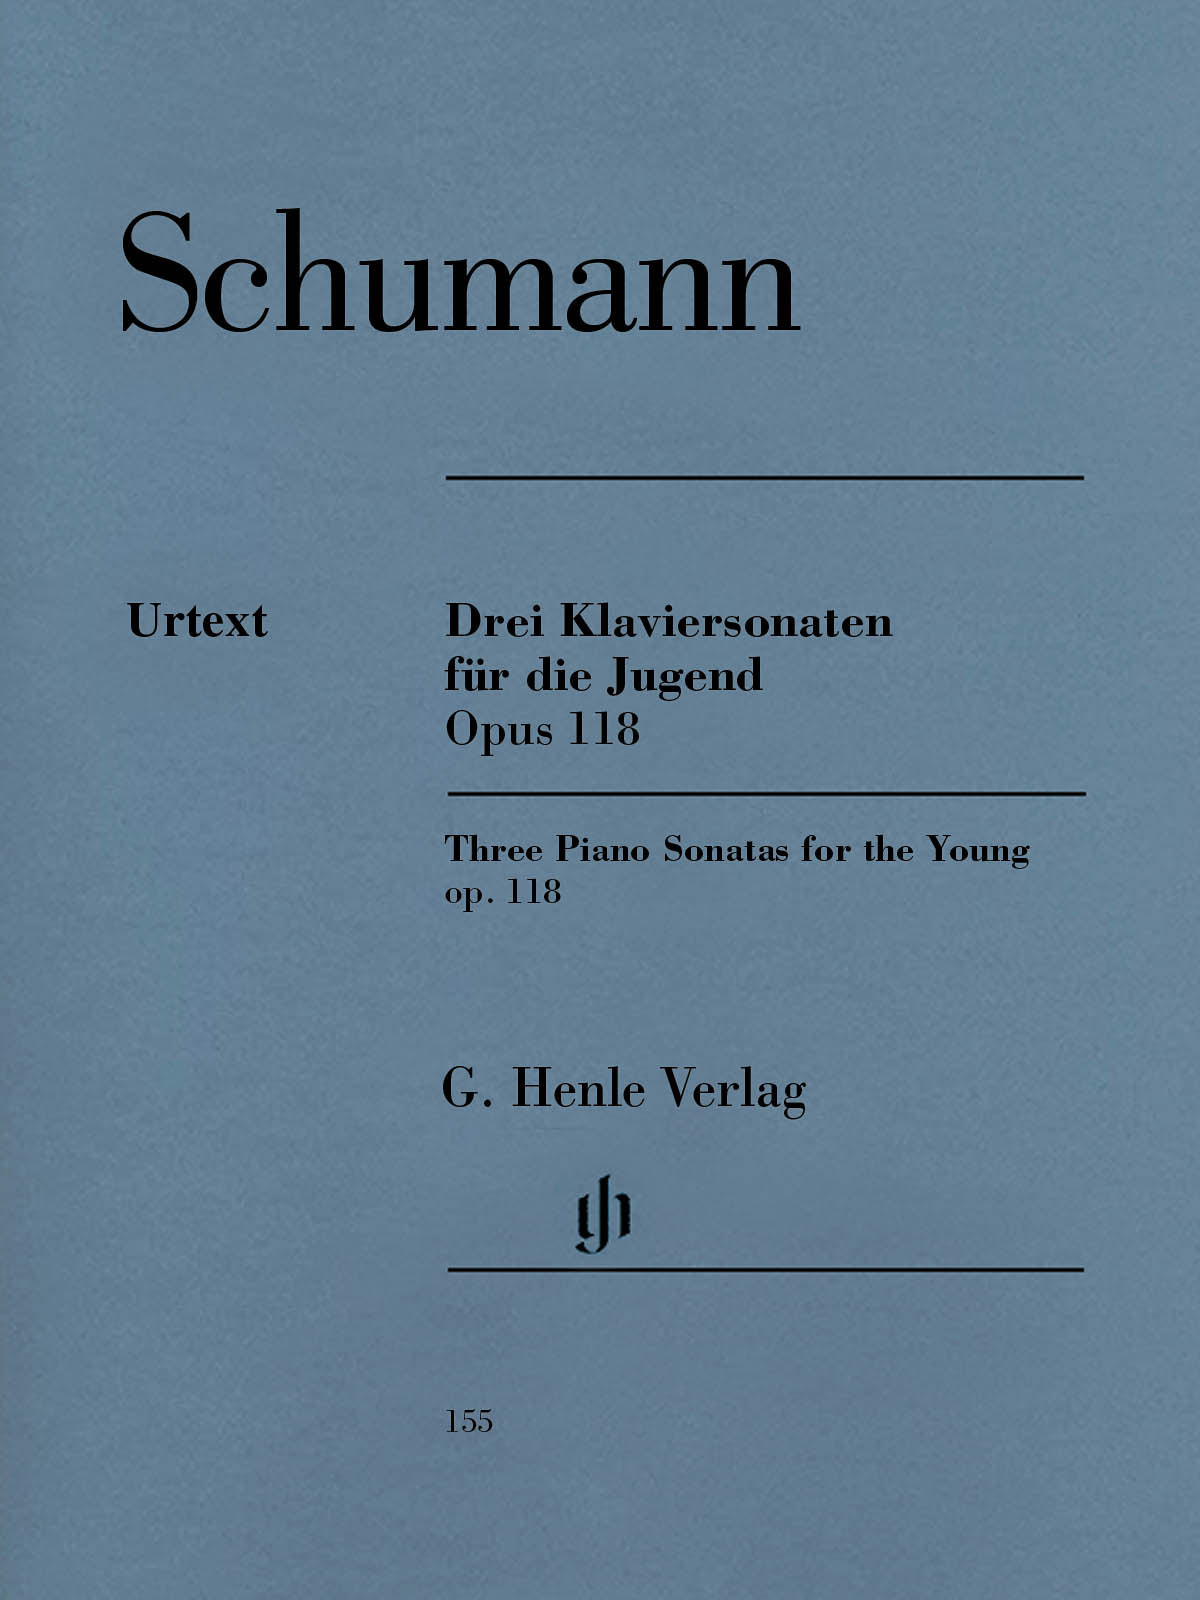 Schumann: 3 Piano Sonatas for the Young, Op. 118